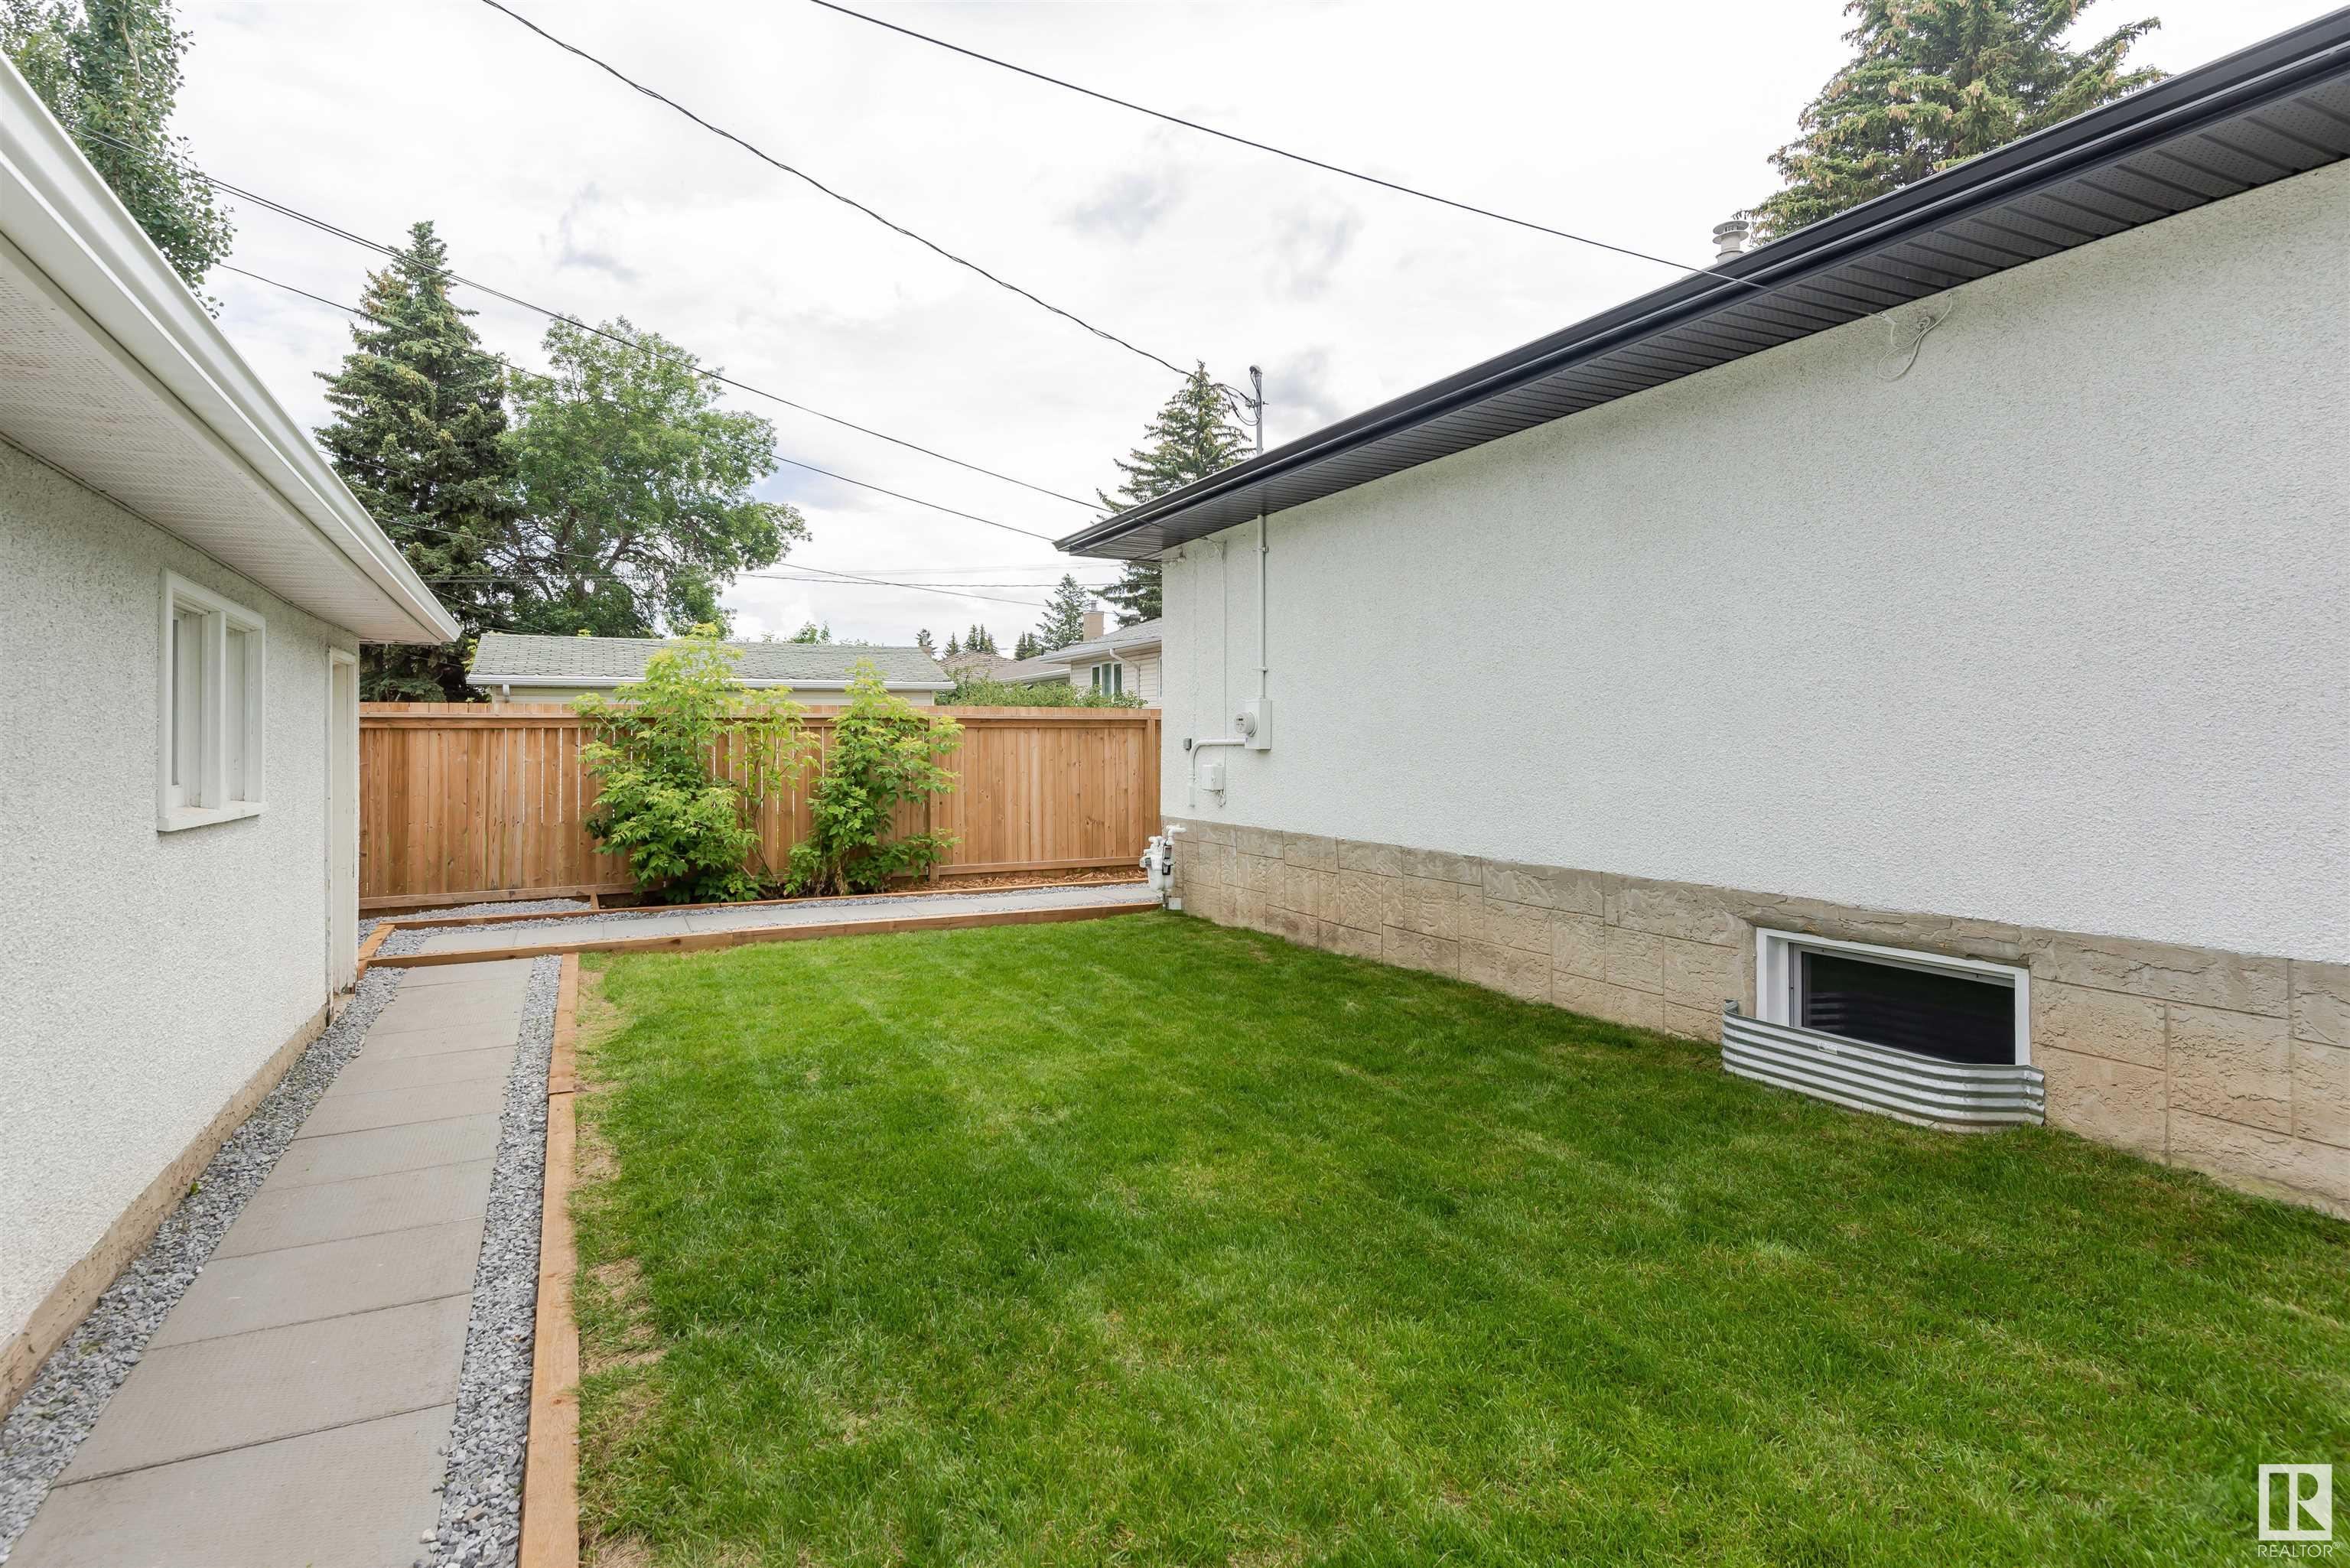      8803 145 ST NW , Edmonton,  ,T5R 0T7 ;  Listing Number: MLS E4354344